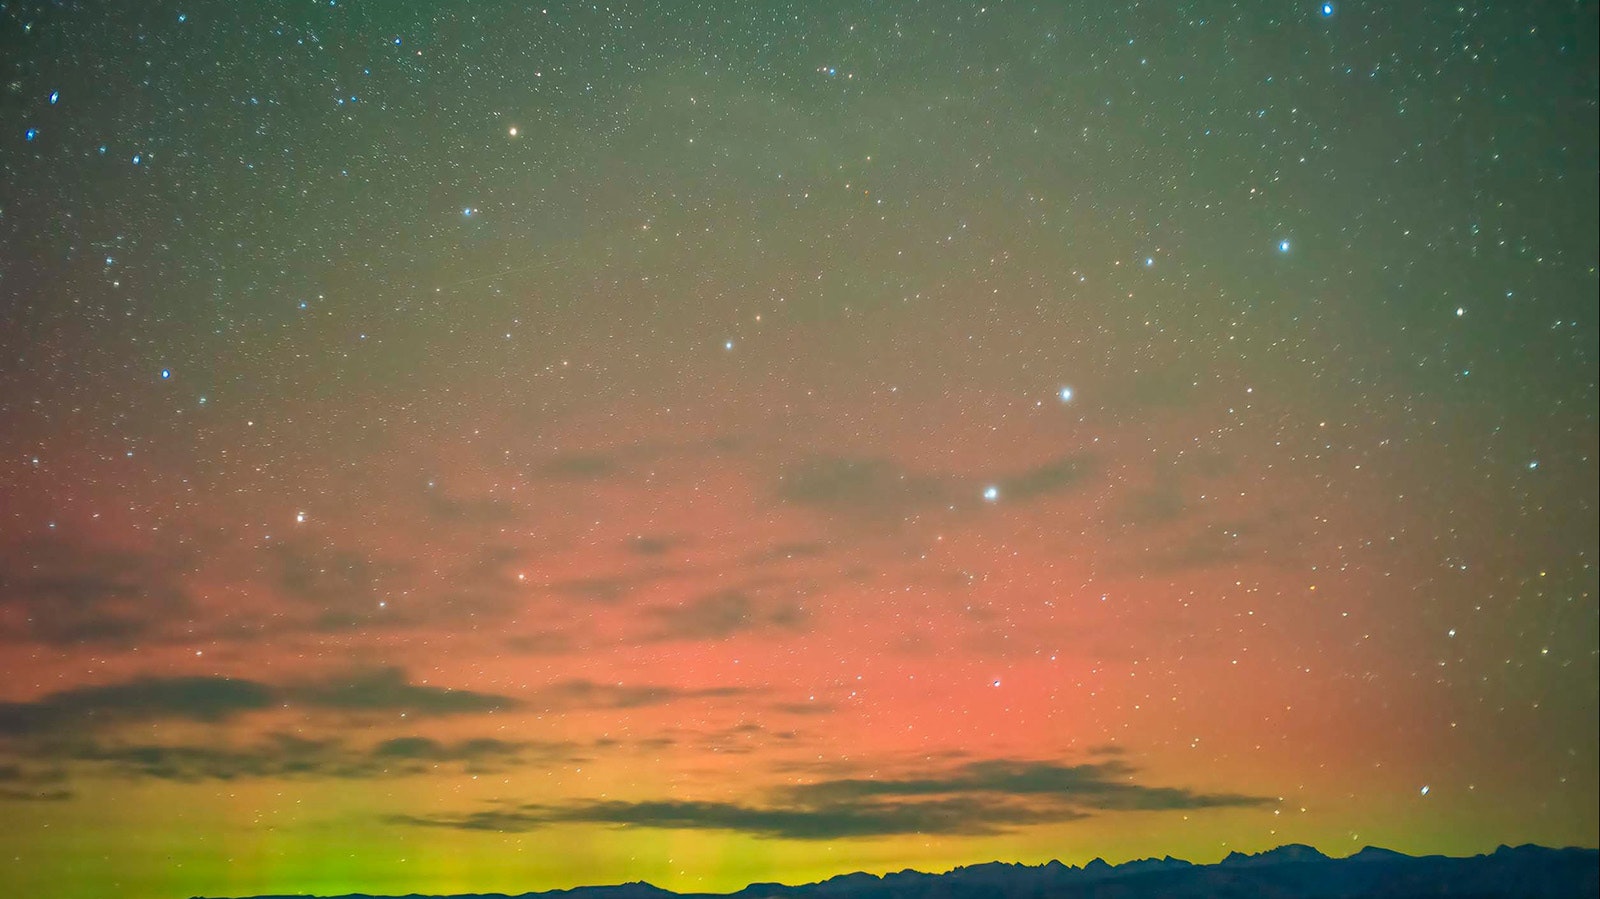 Wyoming photographer Dave Bell captured some stunning images of Saturday's surprise aurora borealis.